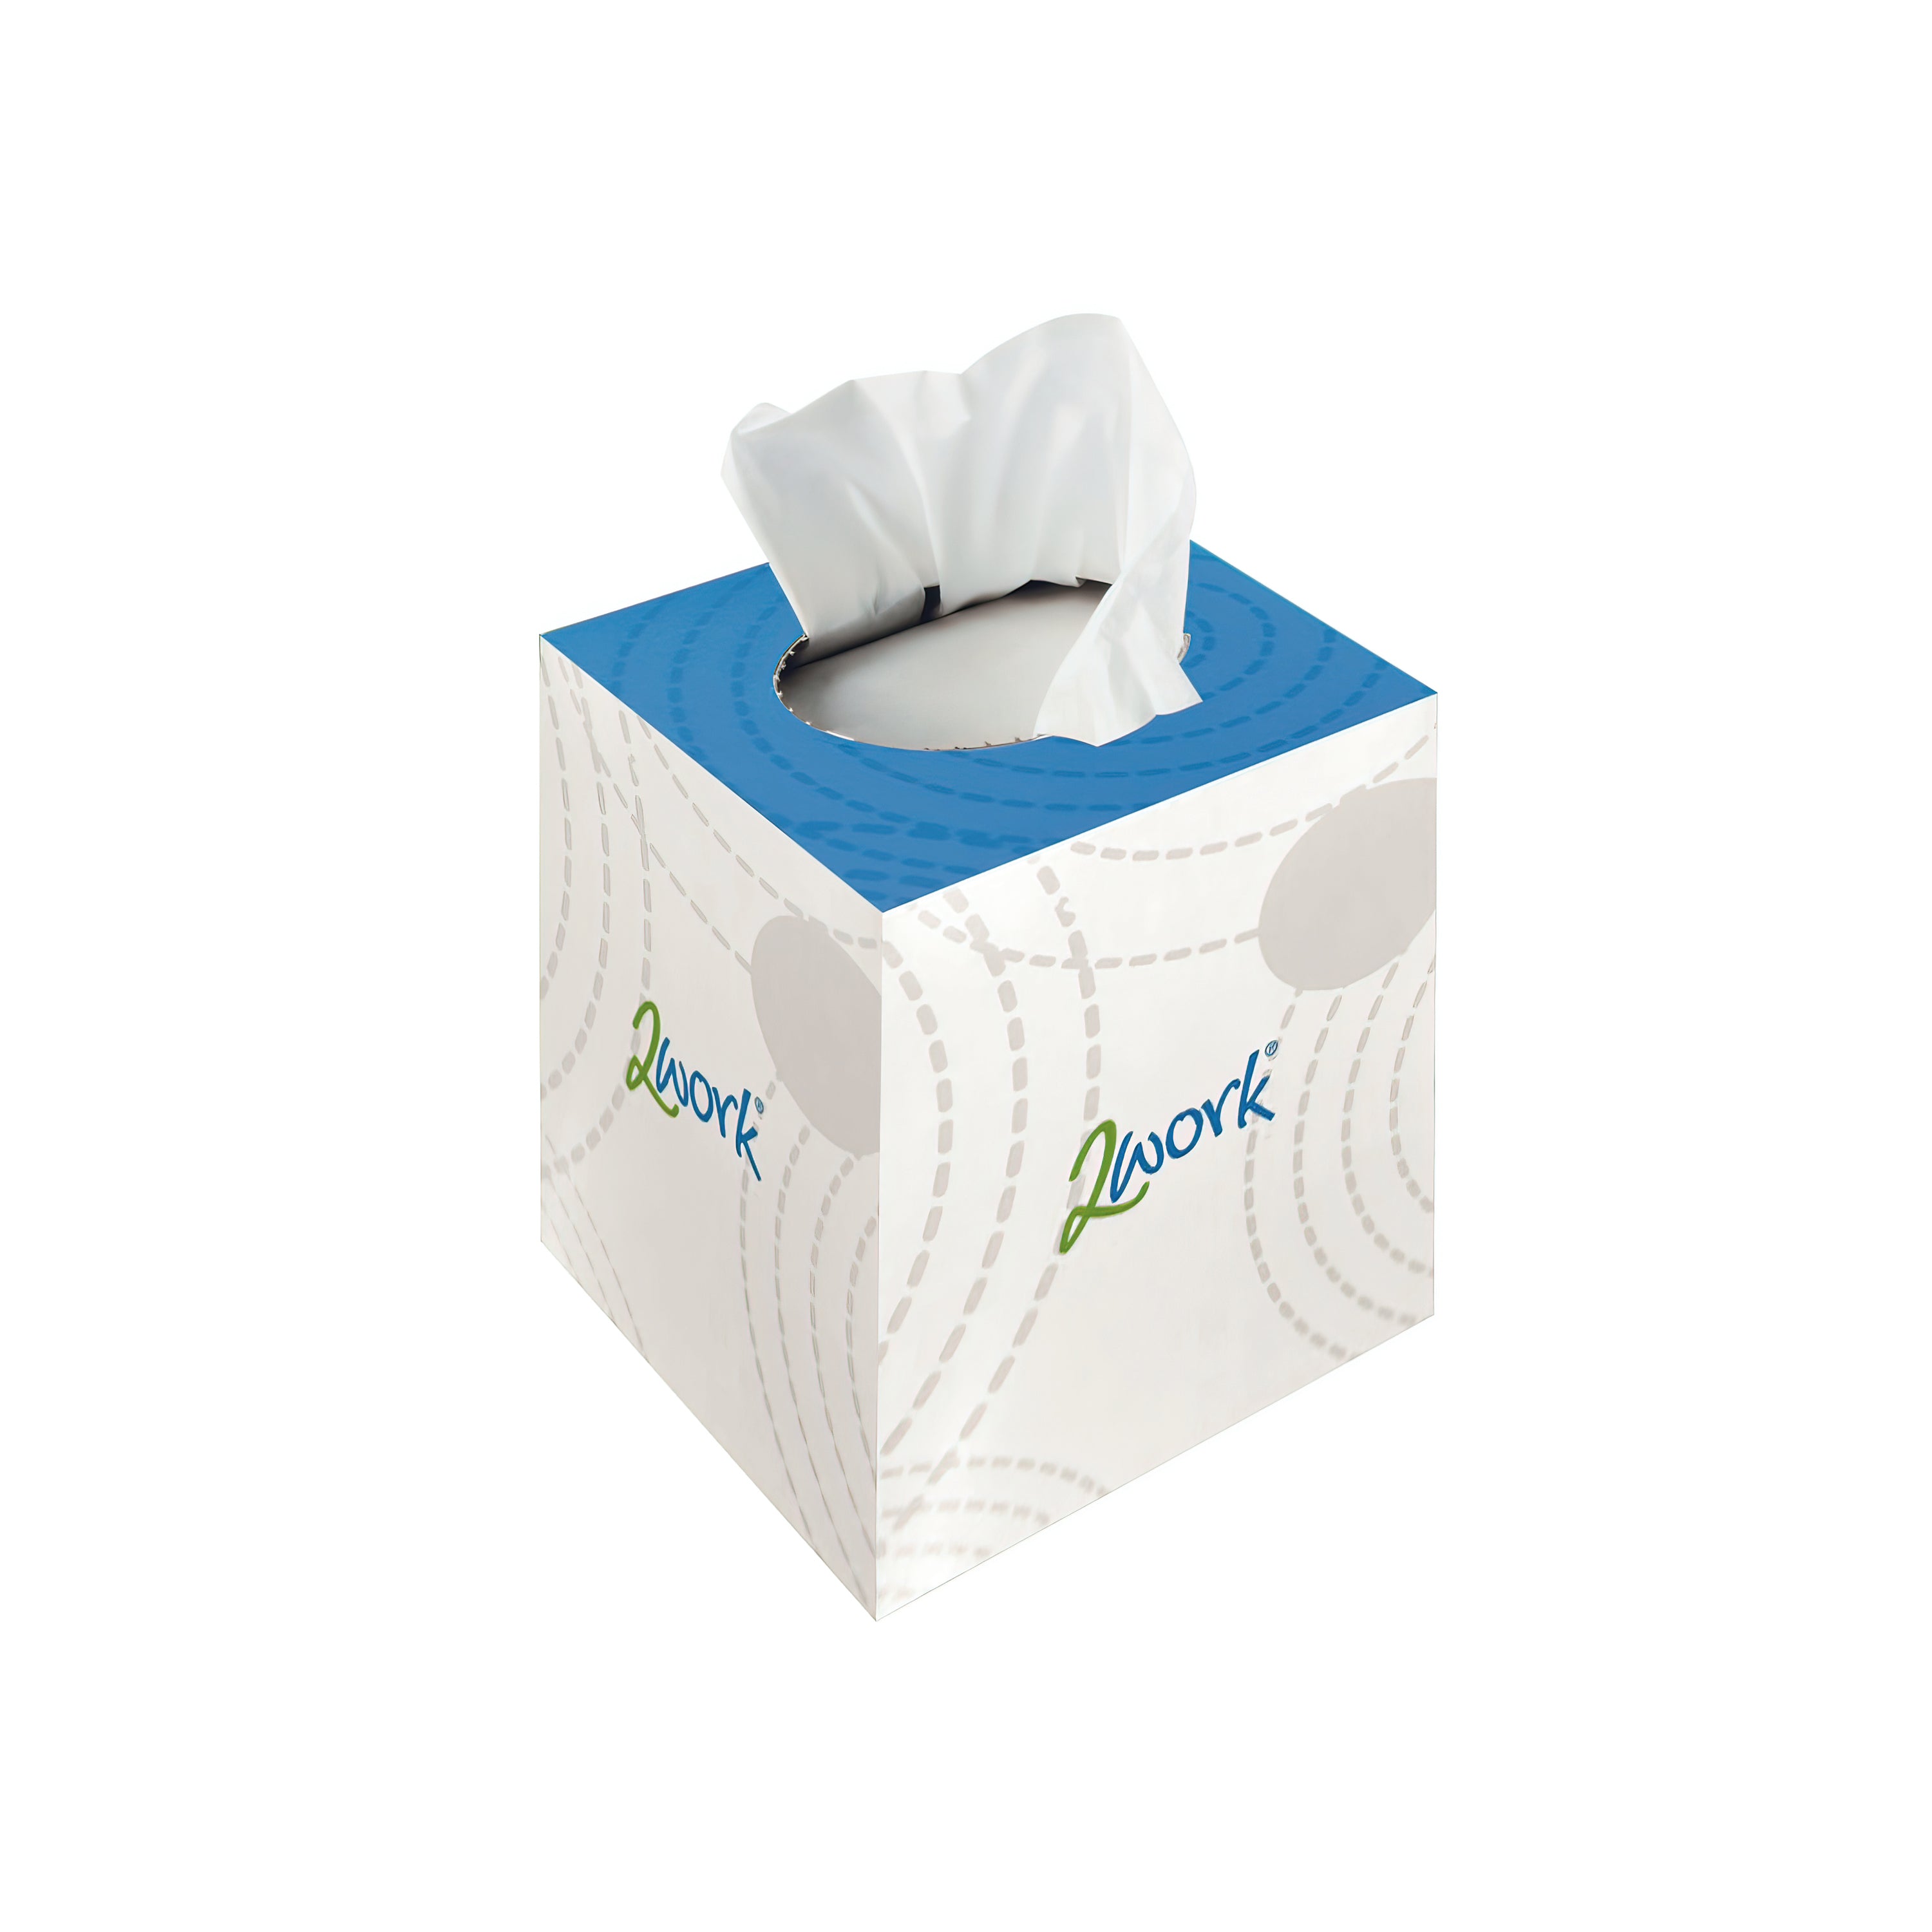 2Work Facial Tissue Cube Box 70 Sheets 2-Ply (Pack of 24) CPD13550